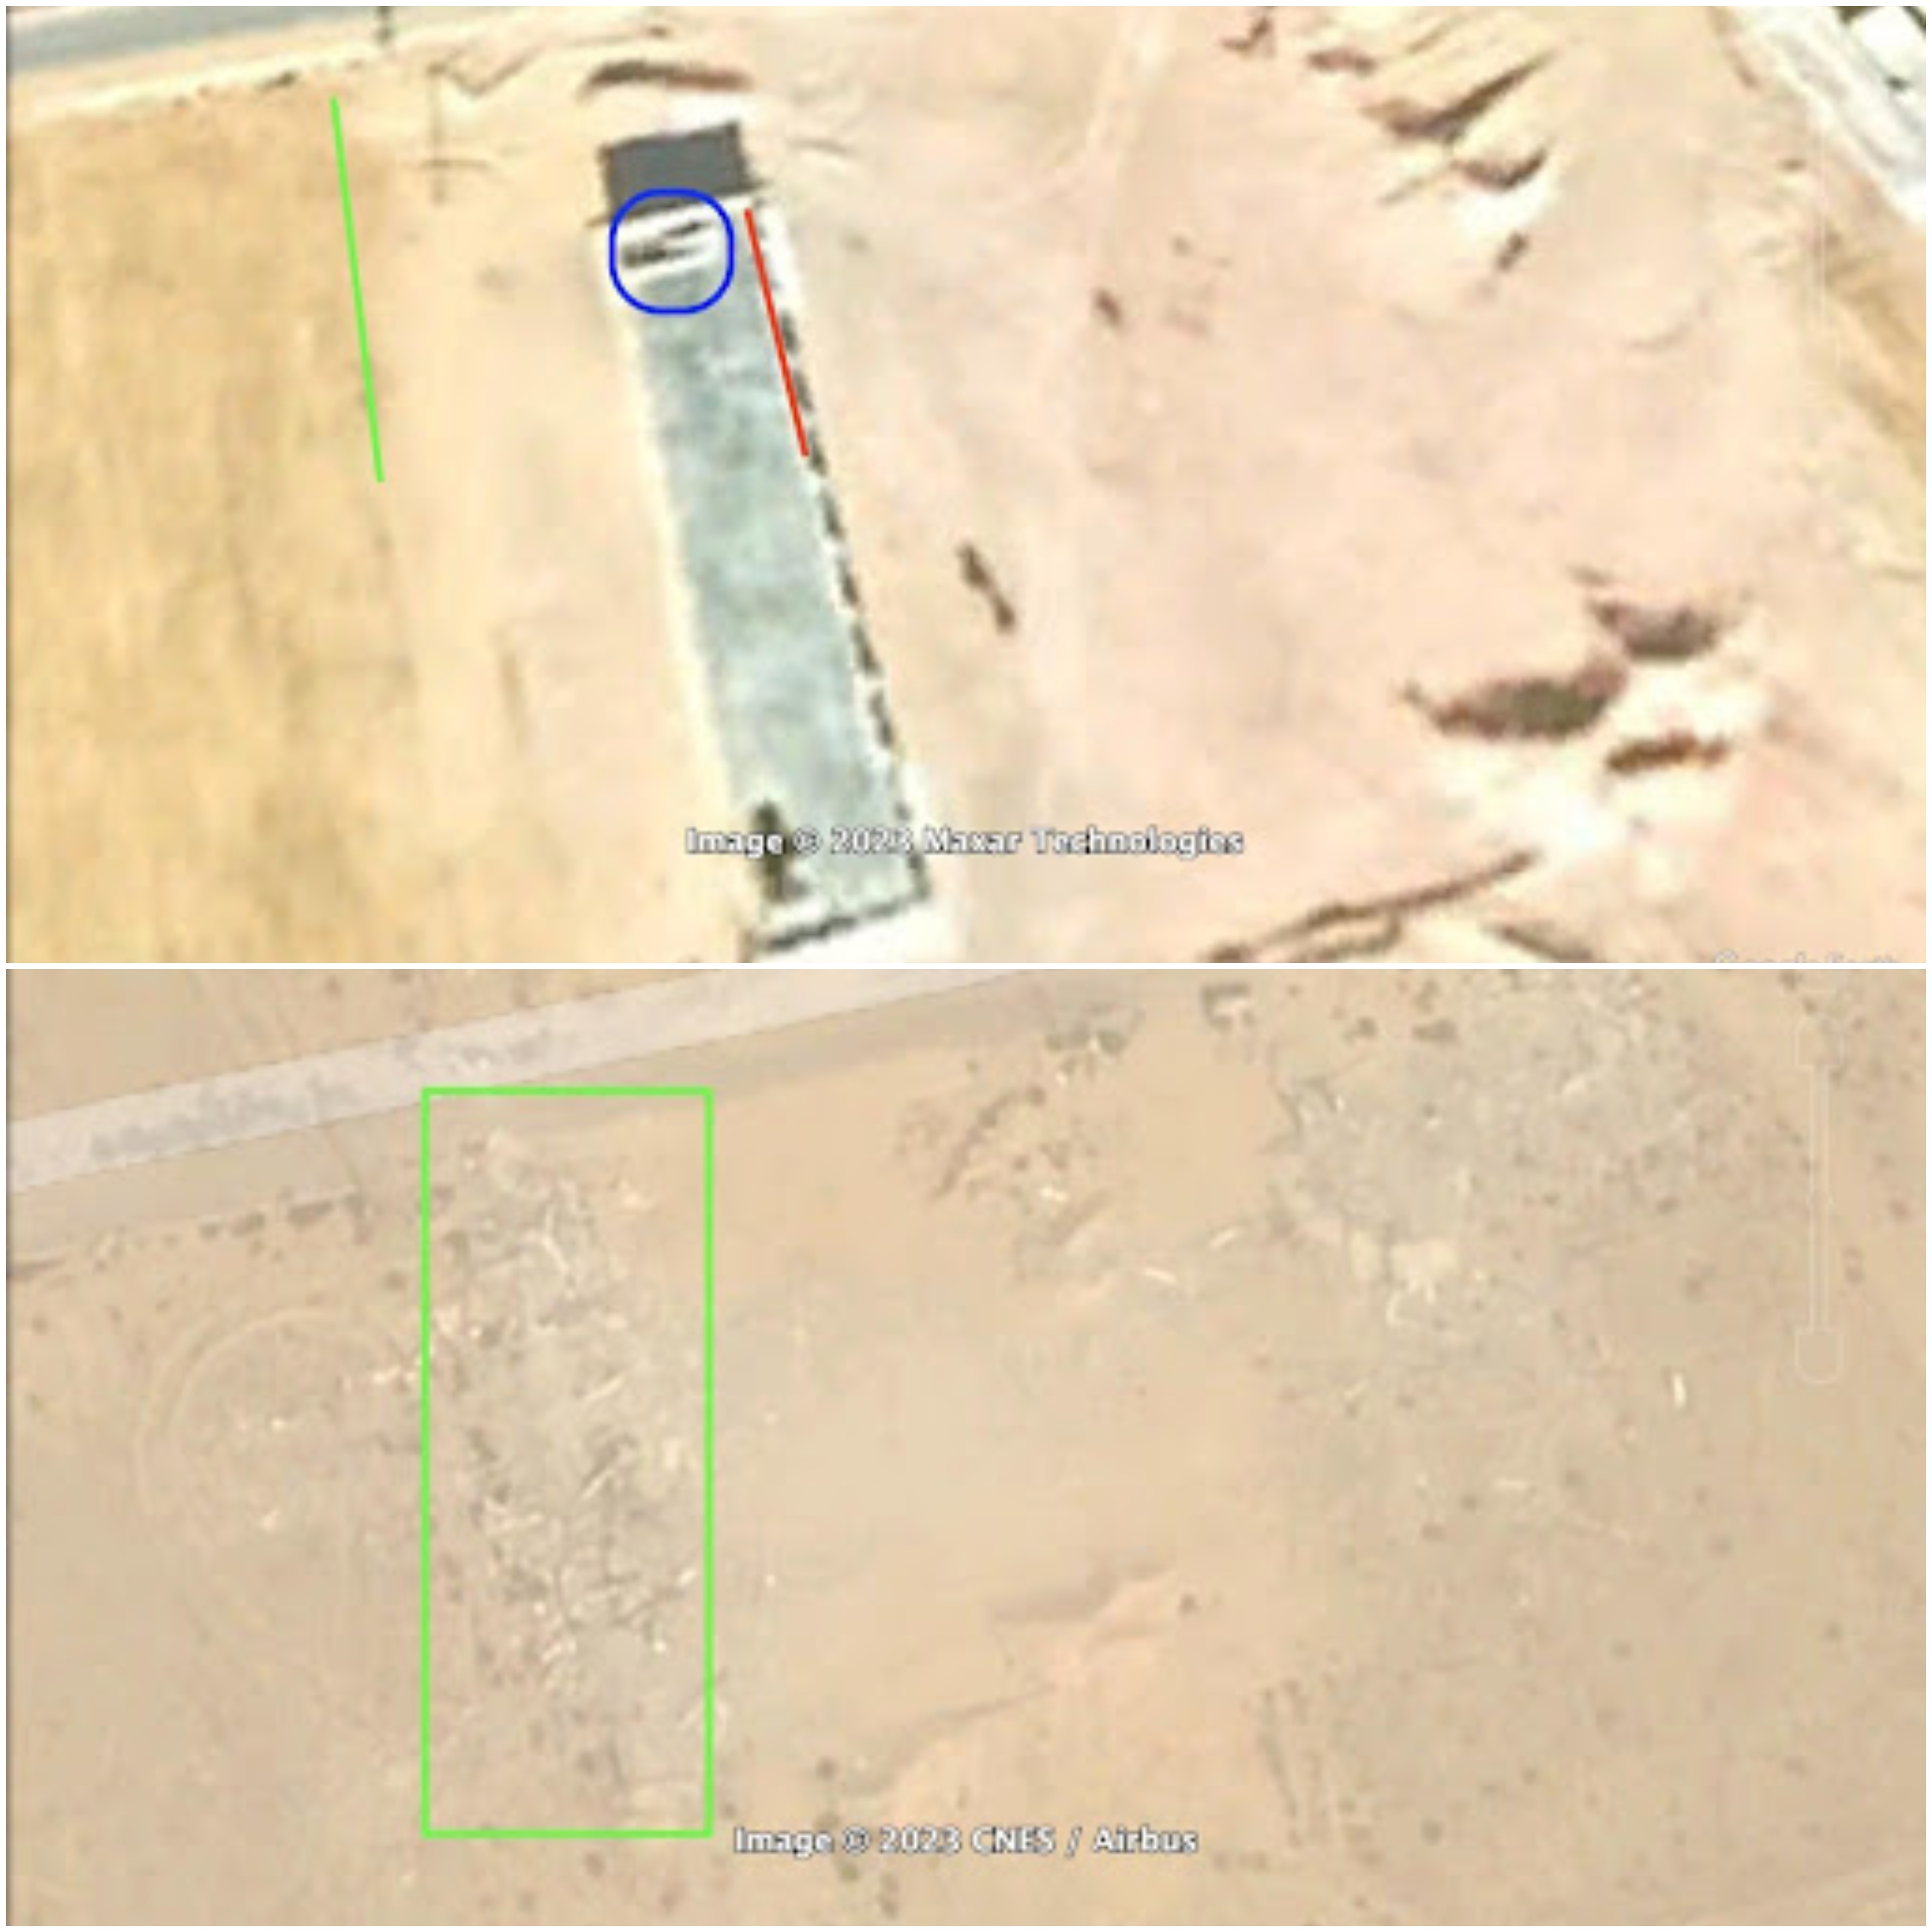 Sinai school before and after destruction